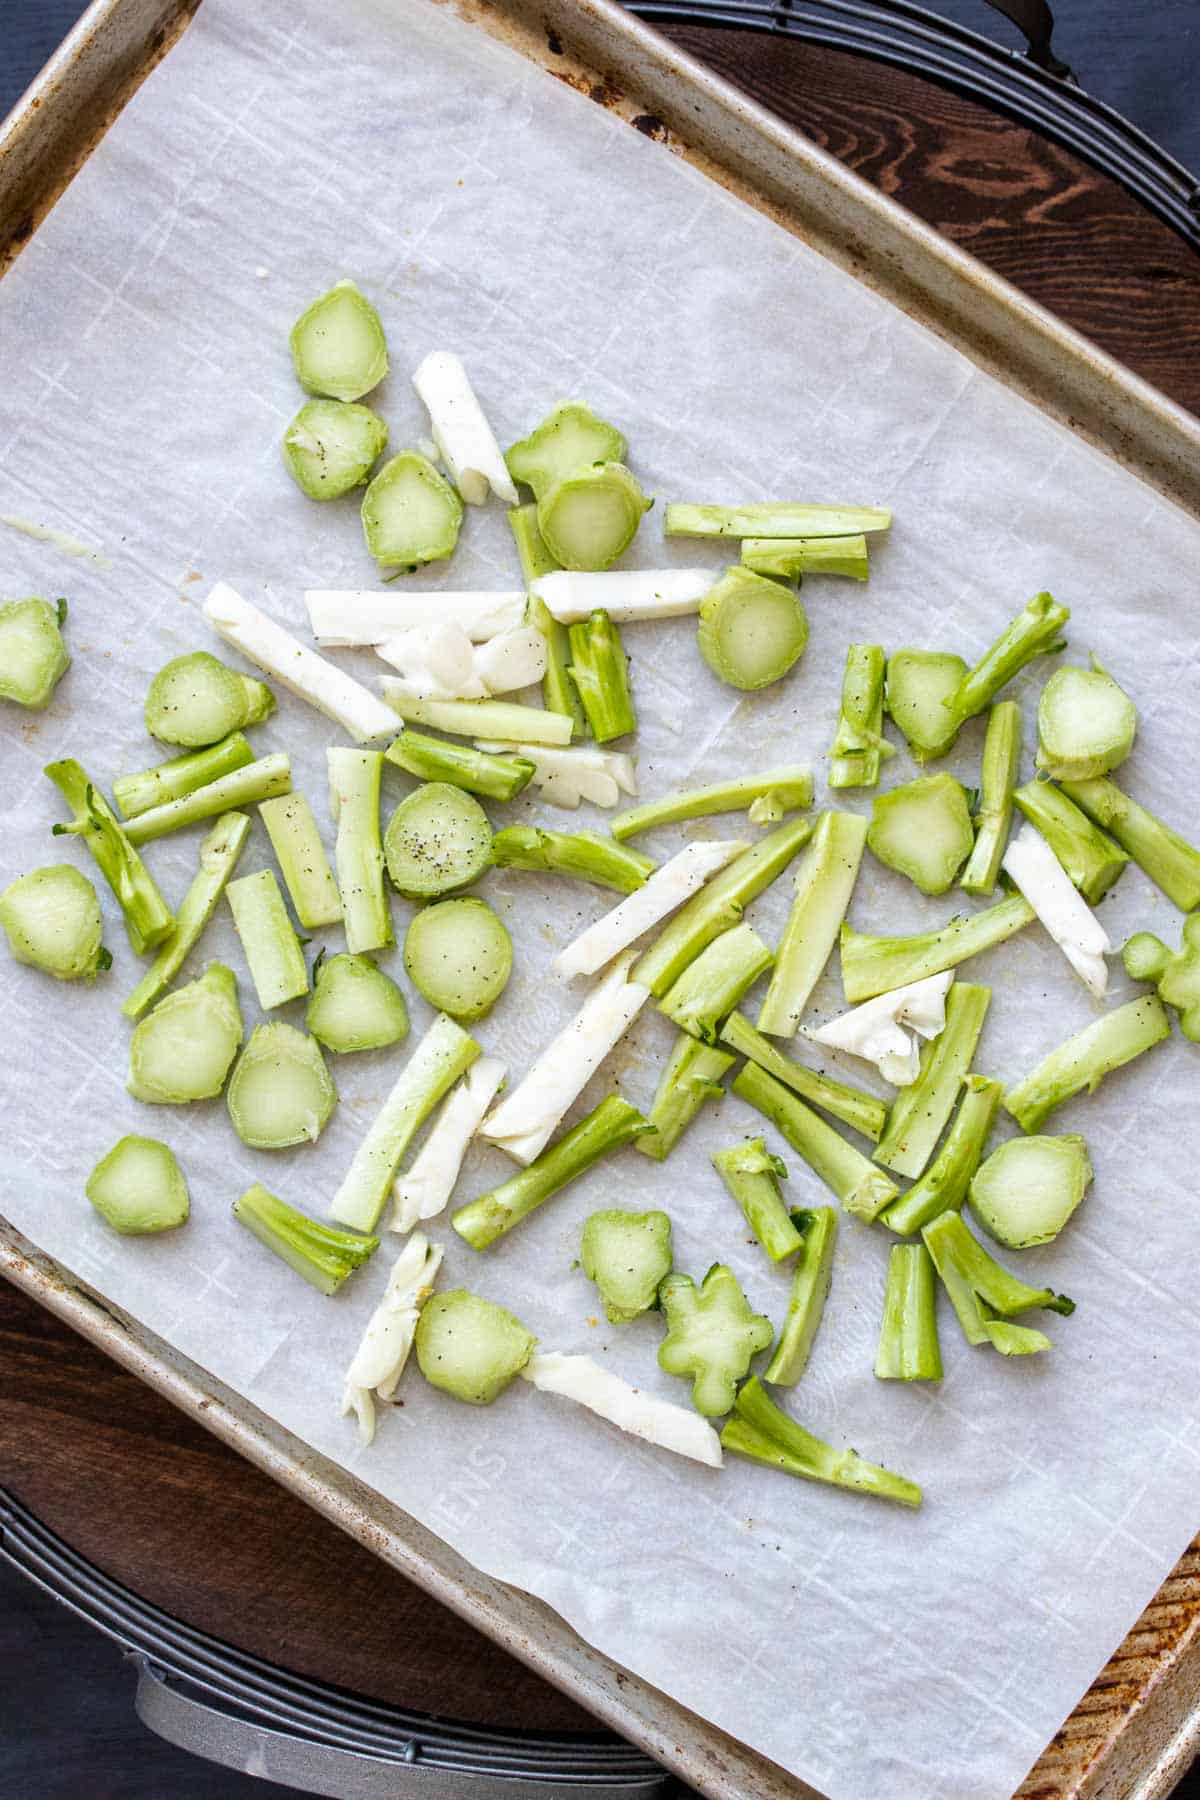 Parchment lined cookie sheet with slices of cauliflower and broccoli stalks